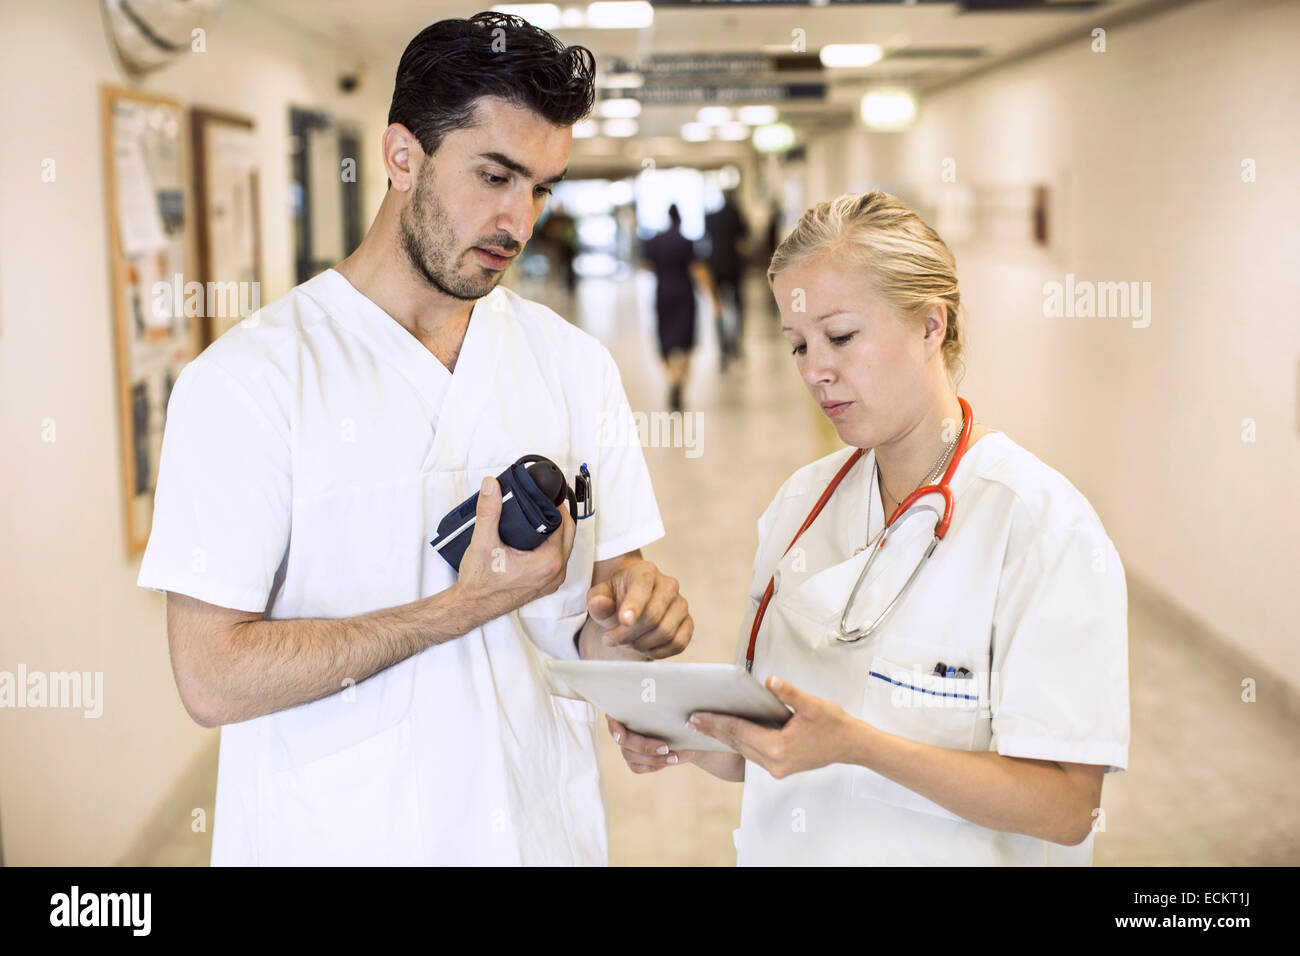 Male and female doctors discussing over digital tablet in hospital corridor Stock Photo